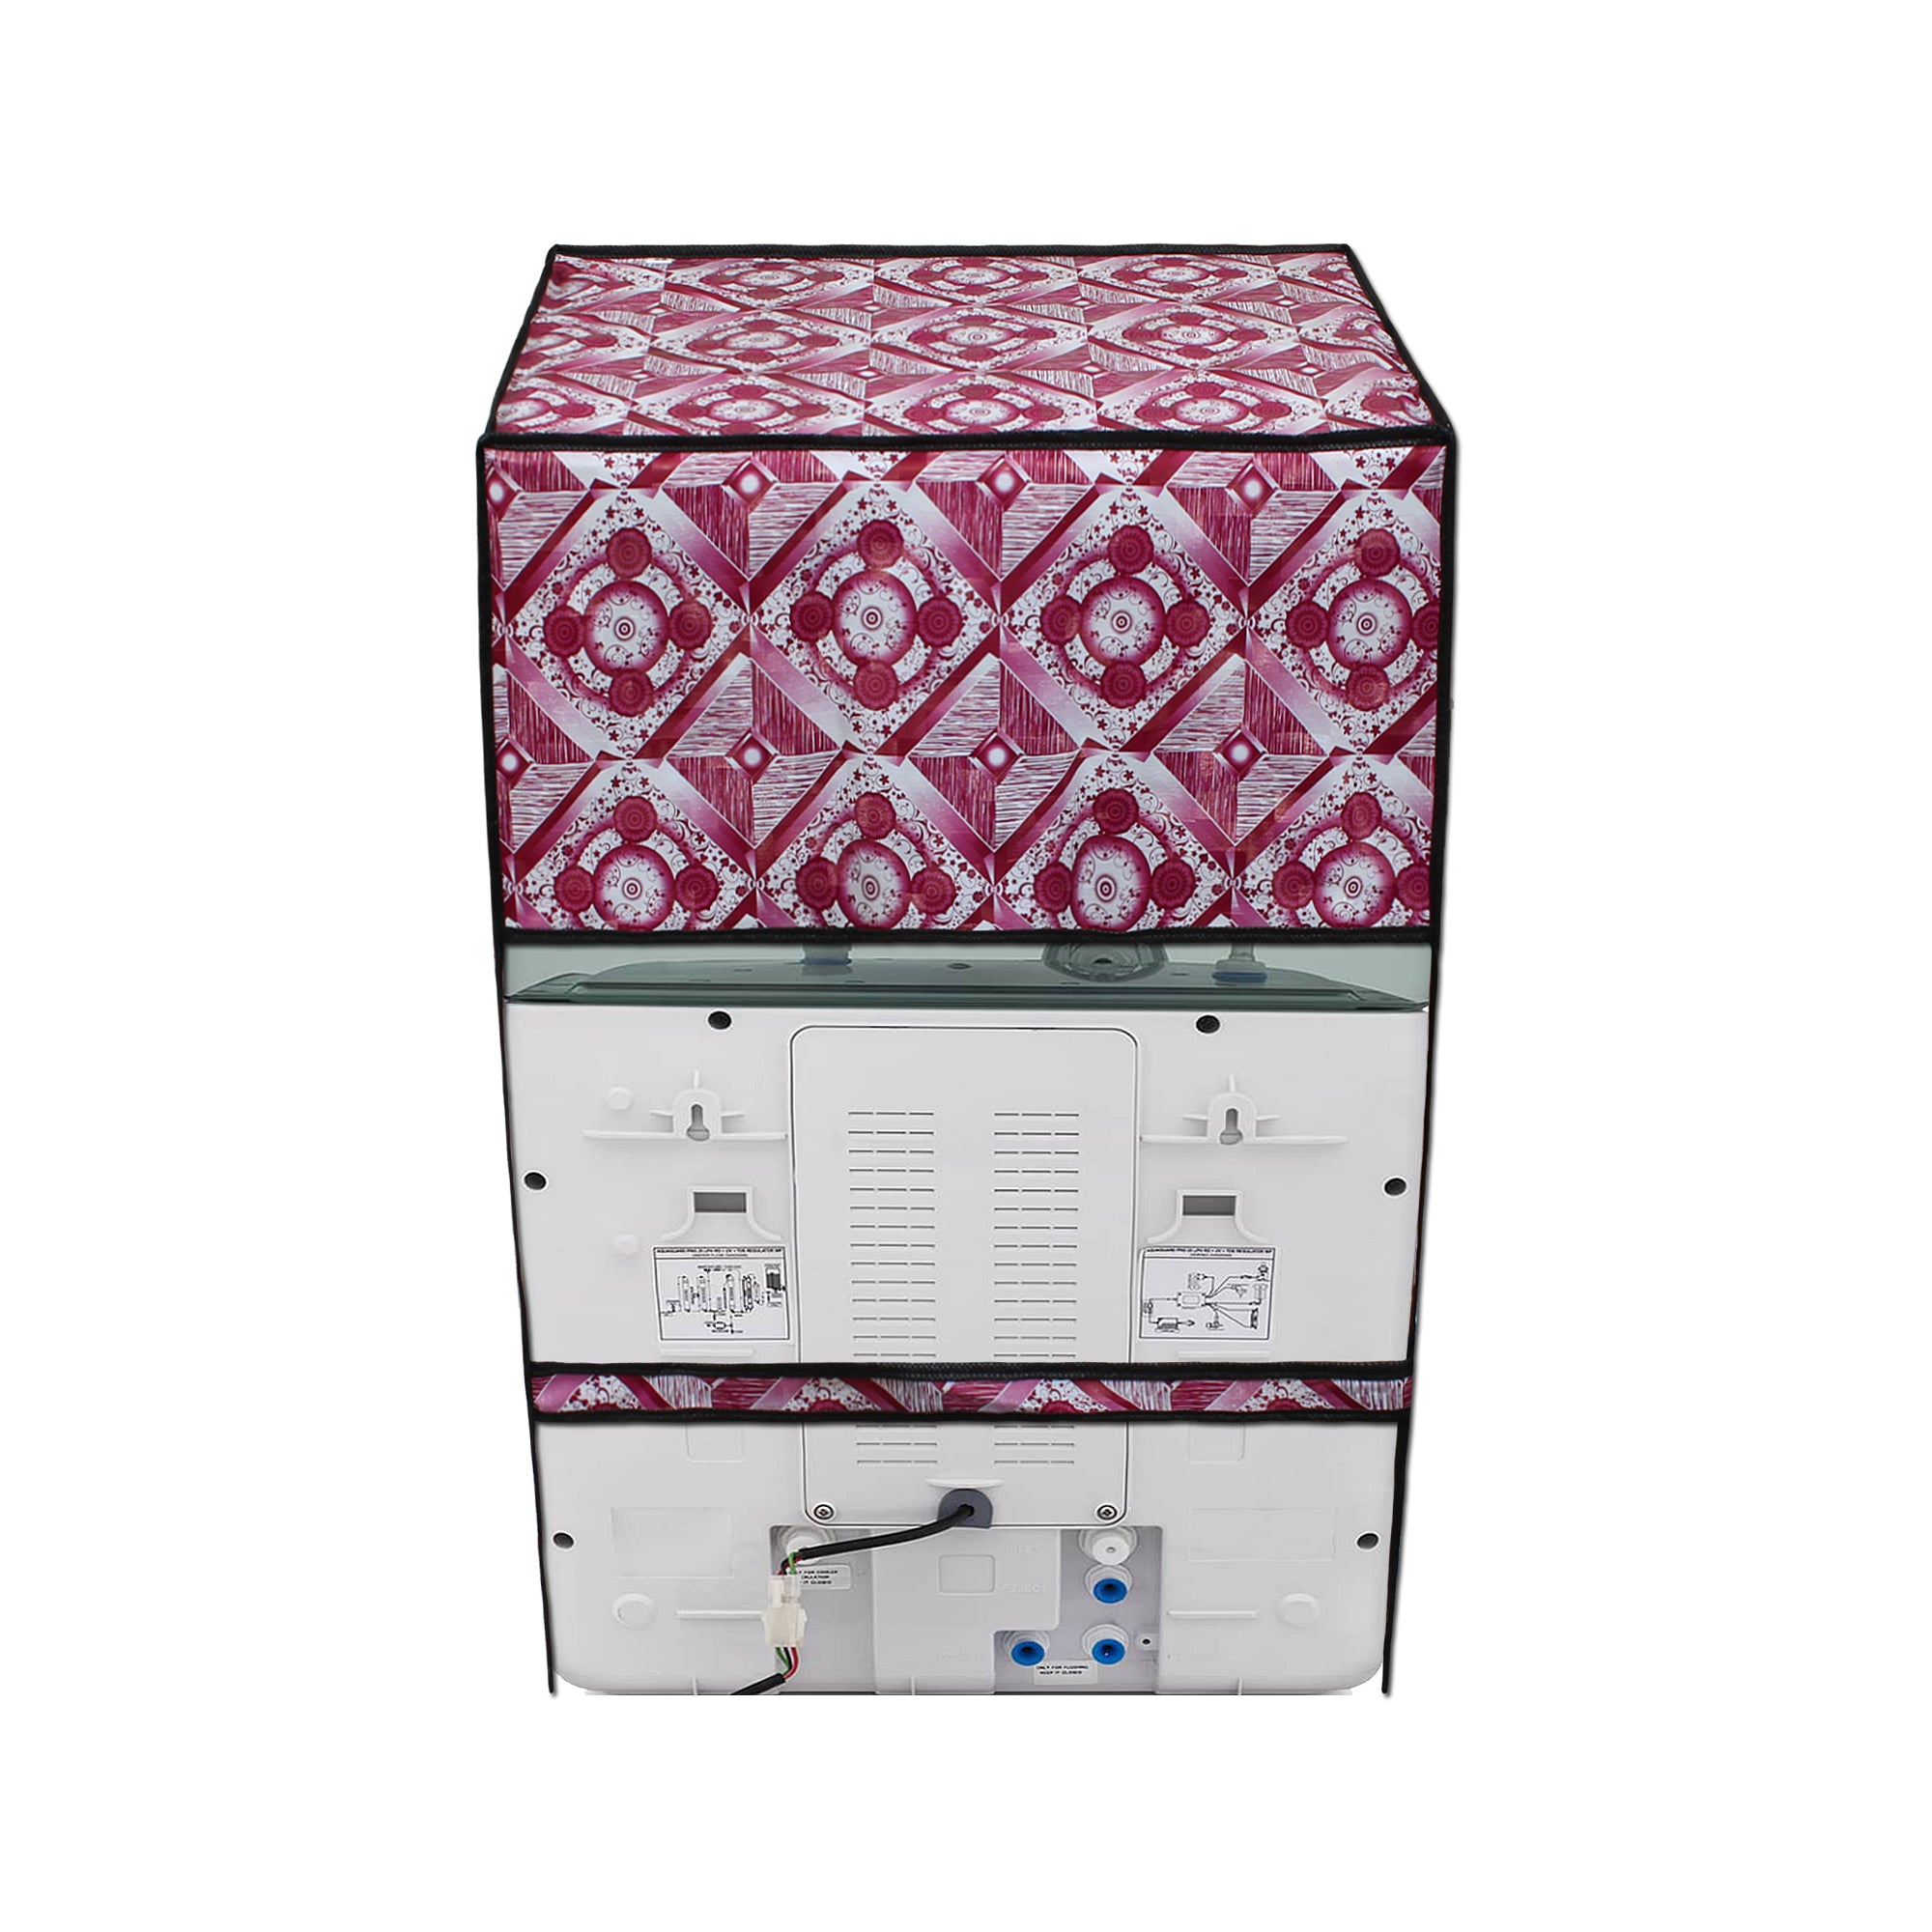 Waterproof & Dustproof Water Purifier RO Cover, SA55 - Dream Care Furnishings Private Limited